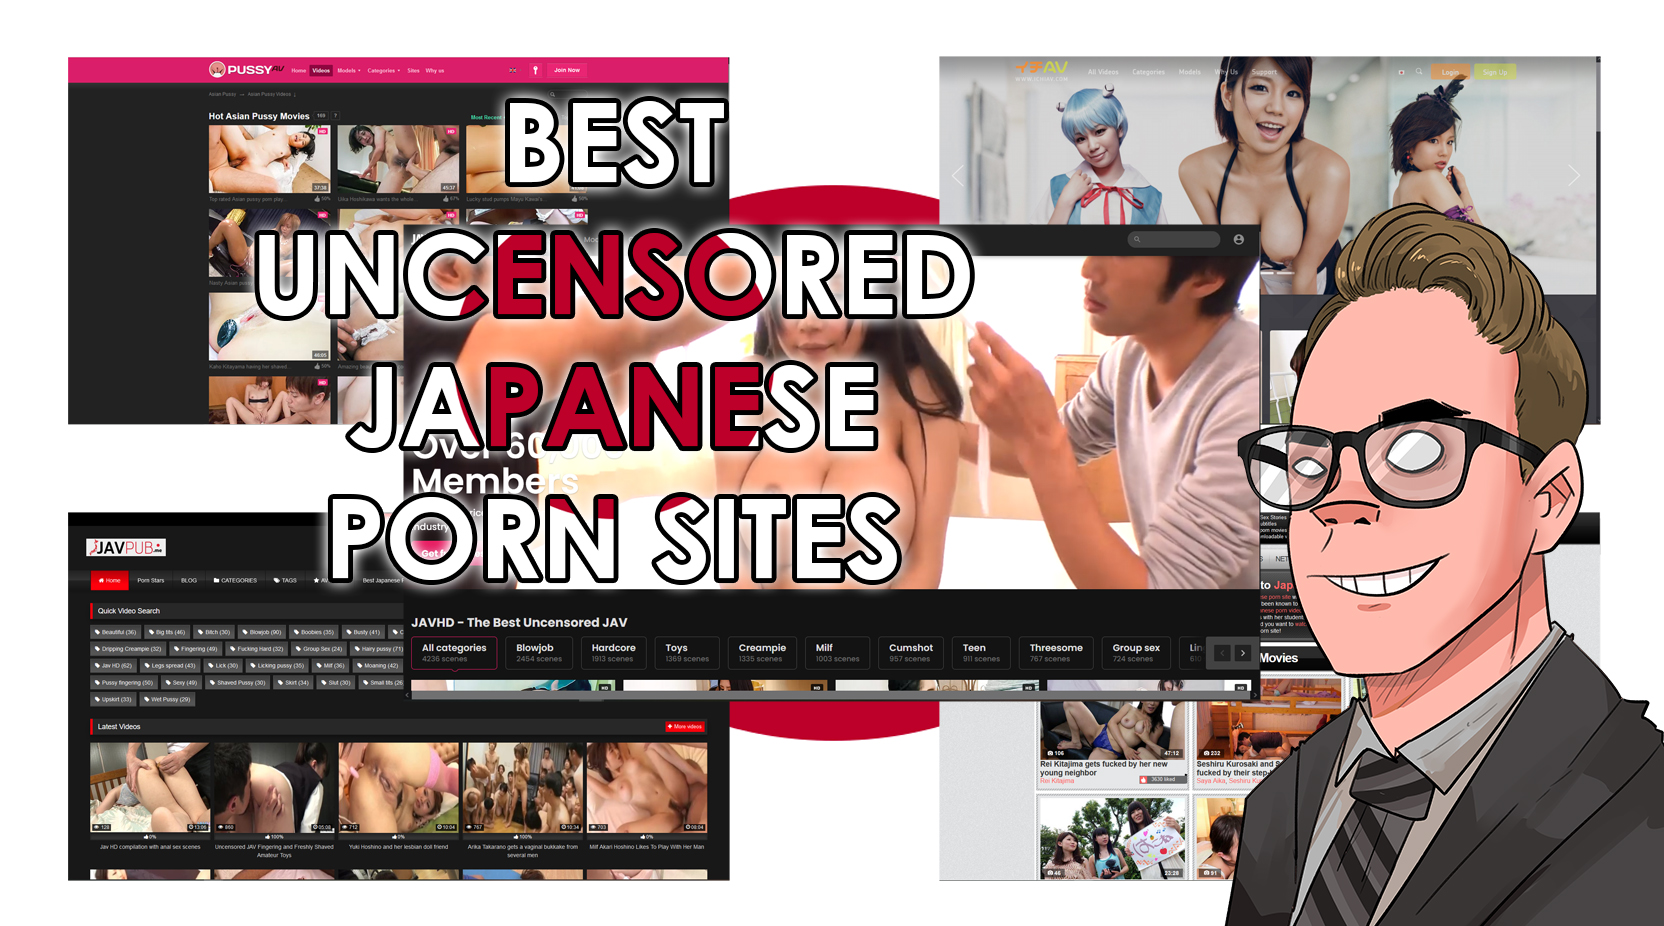 Asian Porn Sites Best View - 5 Best Japanese Uncensored Porn Sites - Free and Premium